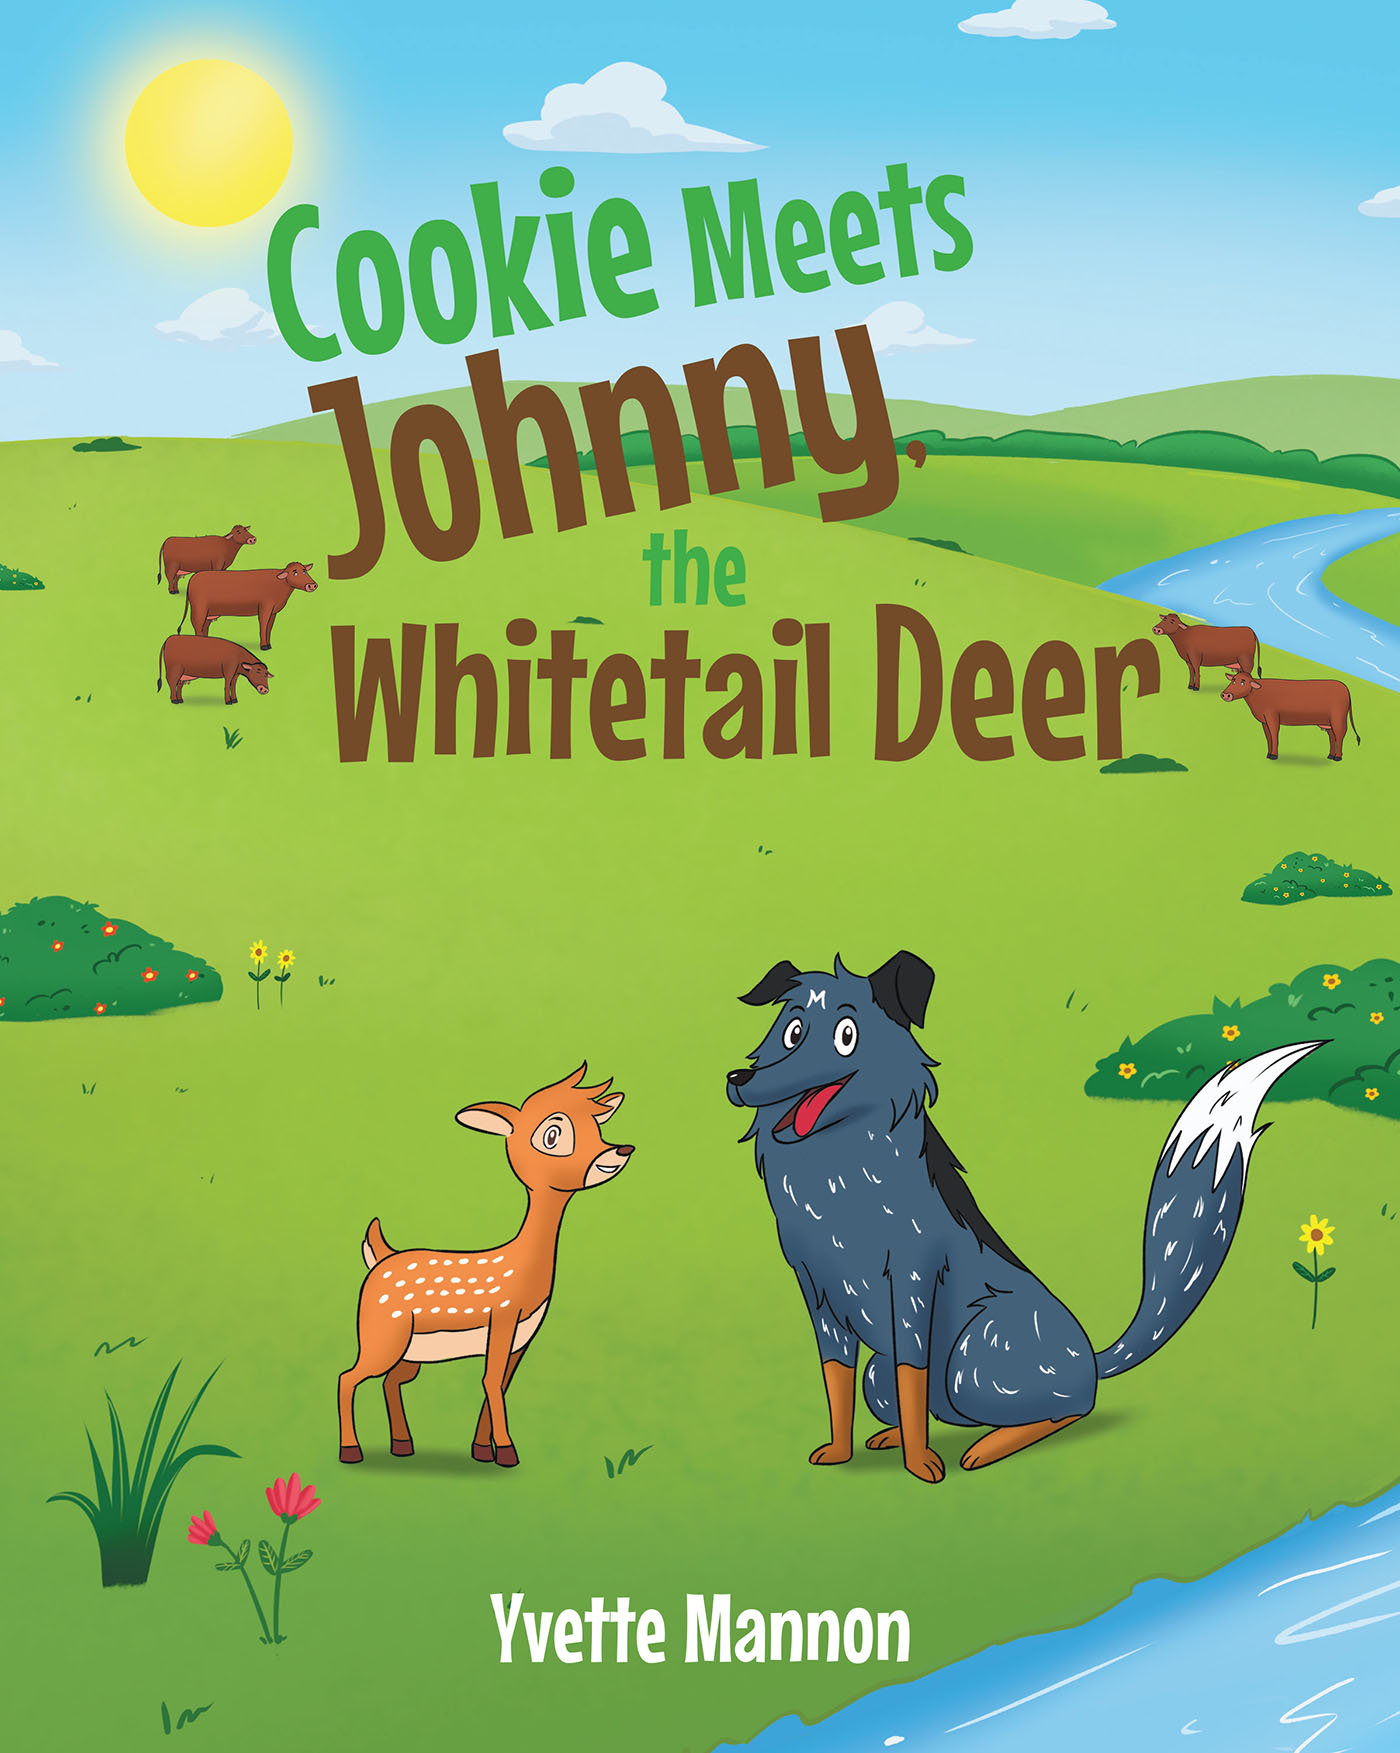 Yvette Mannon’s Newly Released "Cookie Meets Johnny, the Whitetail Deer" is a Charming True Story of a Rescued Fawn and Endless Adventure on the Ranch